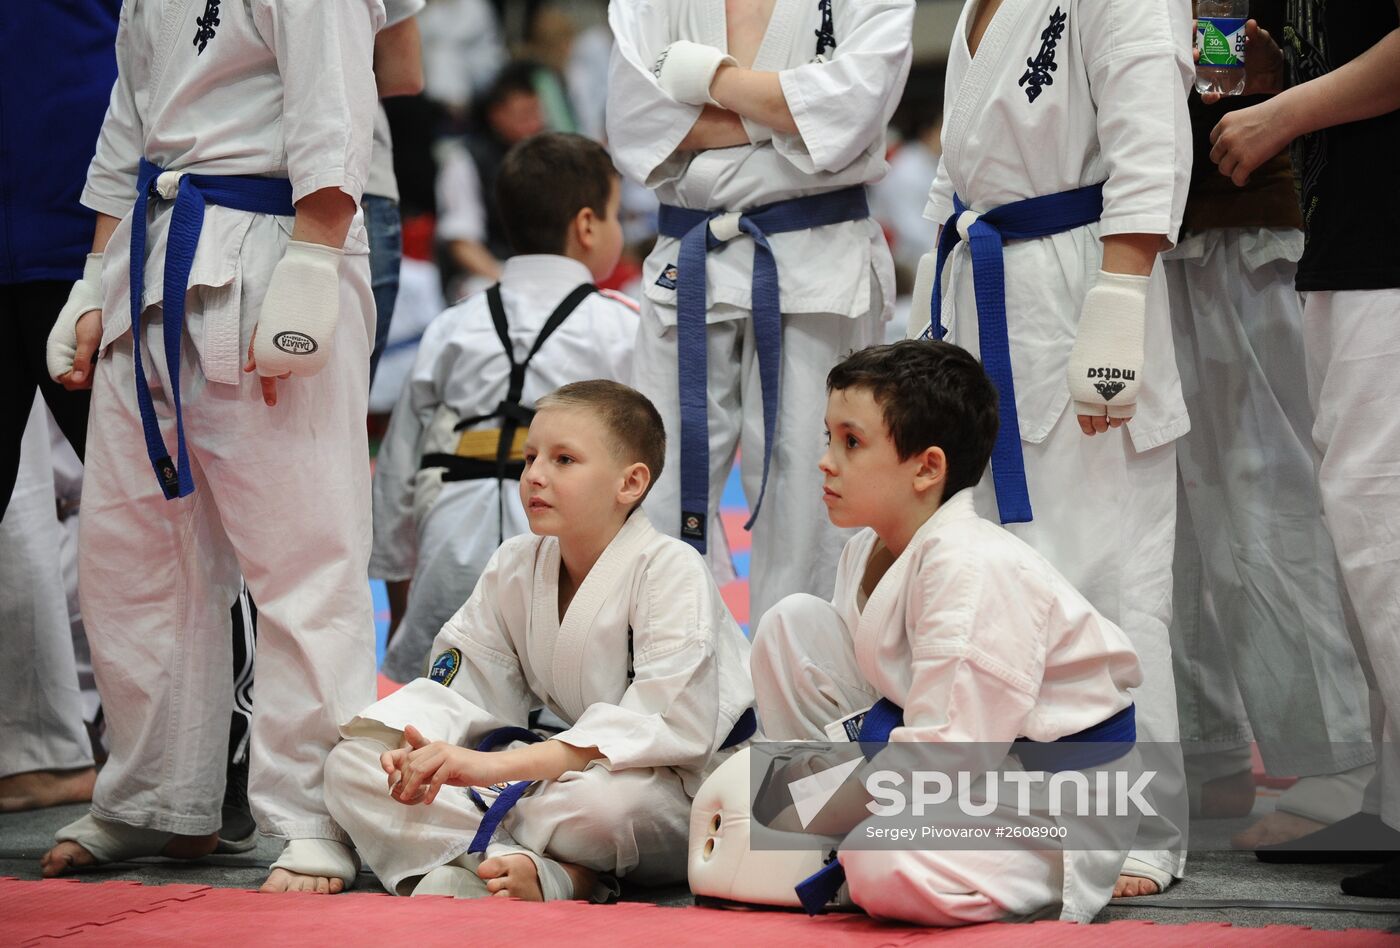 Martial arts competition in Rostov-on-Don